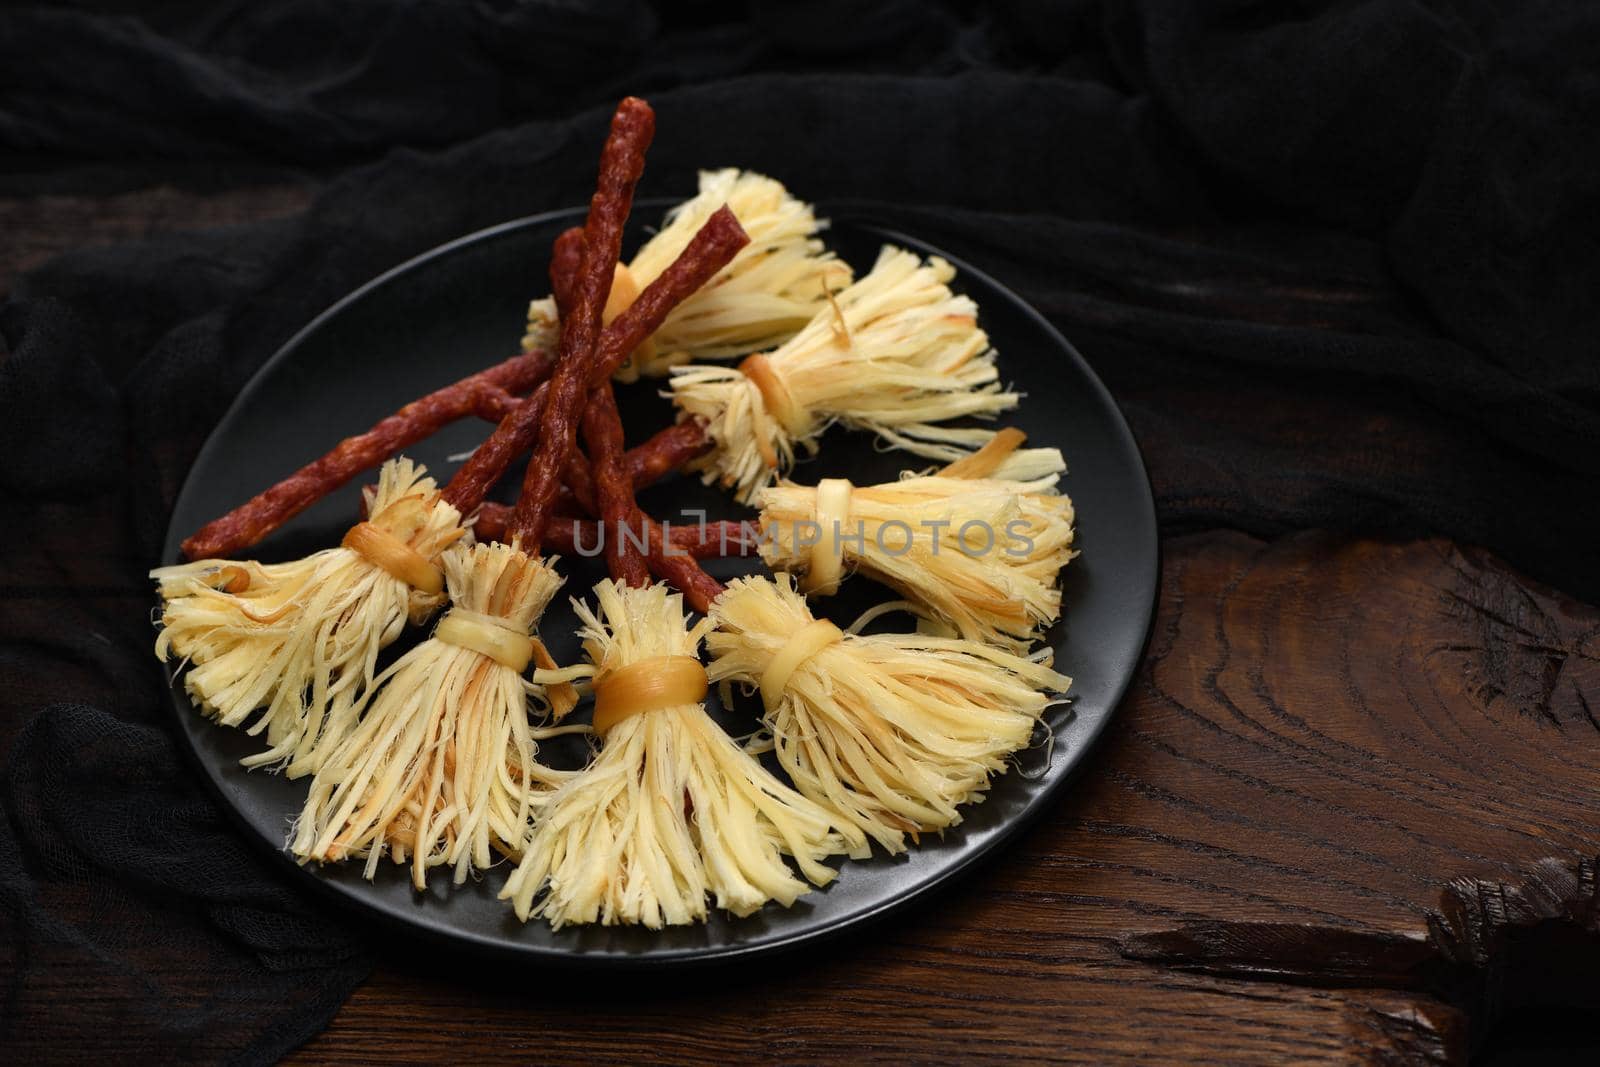 Witches Broom of smoked cheese suluguni and salami  by Apolonia